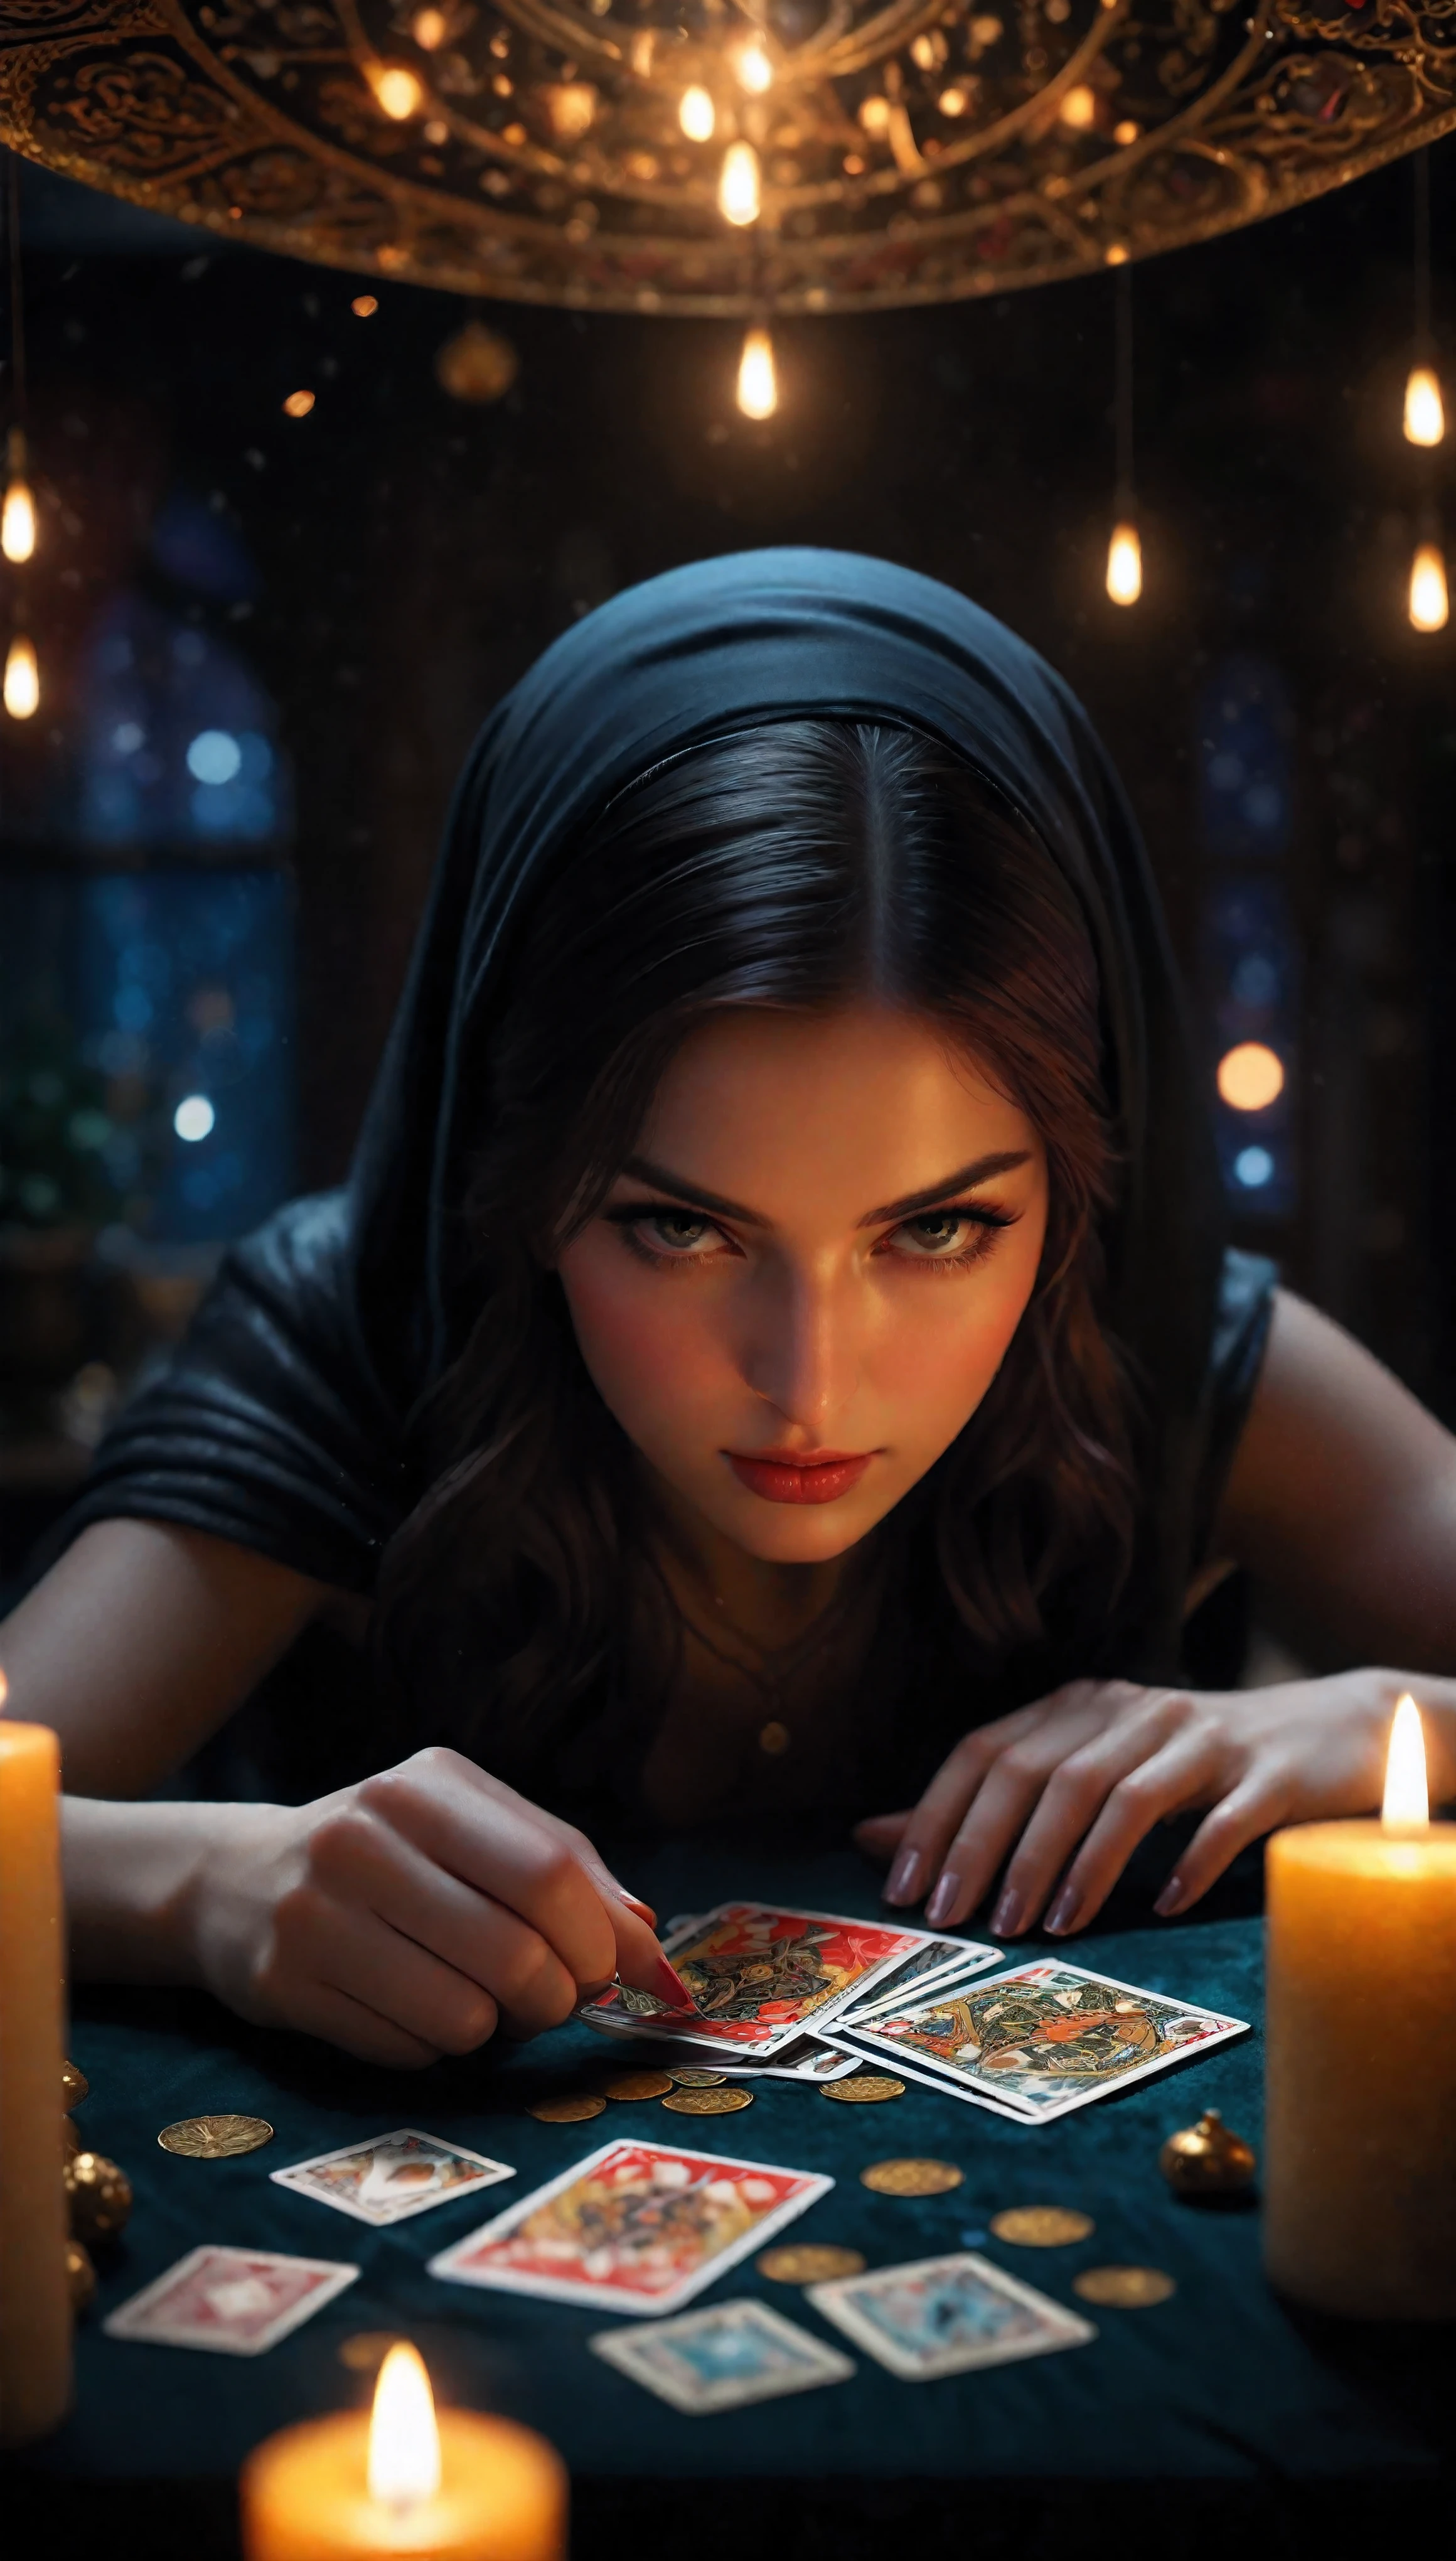 ((Masterpiece in maximum 16K resolution):1.6),((soft_color_photograpy:)1.5), ((Ultra-Detailed):1.4),((Movie-like still images and dynamic angles):1.3). | (Macro shot cinematic photo of Tarot Cards at Tarot table), (Fortune teller reading Tarot card), (Fortune teller room), (focus on tarot cards), (macro lens), (Fortune teller ornaments), (Dark Candles), (luminous object), (Mysterious atmosphere), (shimmer), (aesthetic DnD vase), (visual experience),(Realism), (Realistic),award-winning graphics, dark shot, film grain, extremely detailed, Digital Art, rtx, Unreal Engine, scene concept anti glare effect, All captured with sharp focus. | Rendered in ultra-high definition with UHD and retina quality, this masterpiece ensures anatomical correctness and textured skin with super detail. With a focus on high quality and accuracy, this award-winning portrayal captures every nuance in stunning 16k resolution, immersing viewers in its lifelike depiction. | ((perfect_composition, perfect_design, perfect_layout, perfect_detail, ultra_detailed)), ((enhance_all, fix_everything)), More Detail, Enhance.